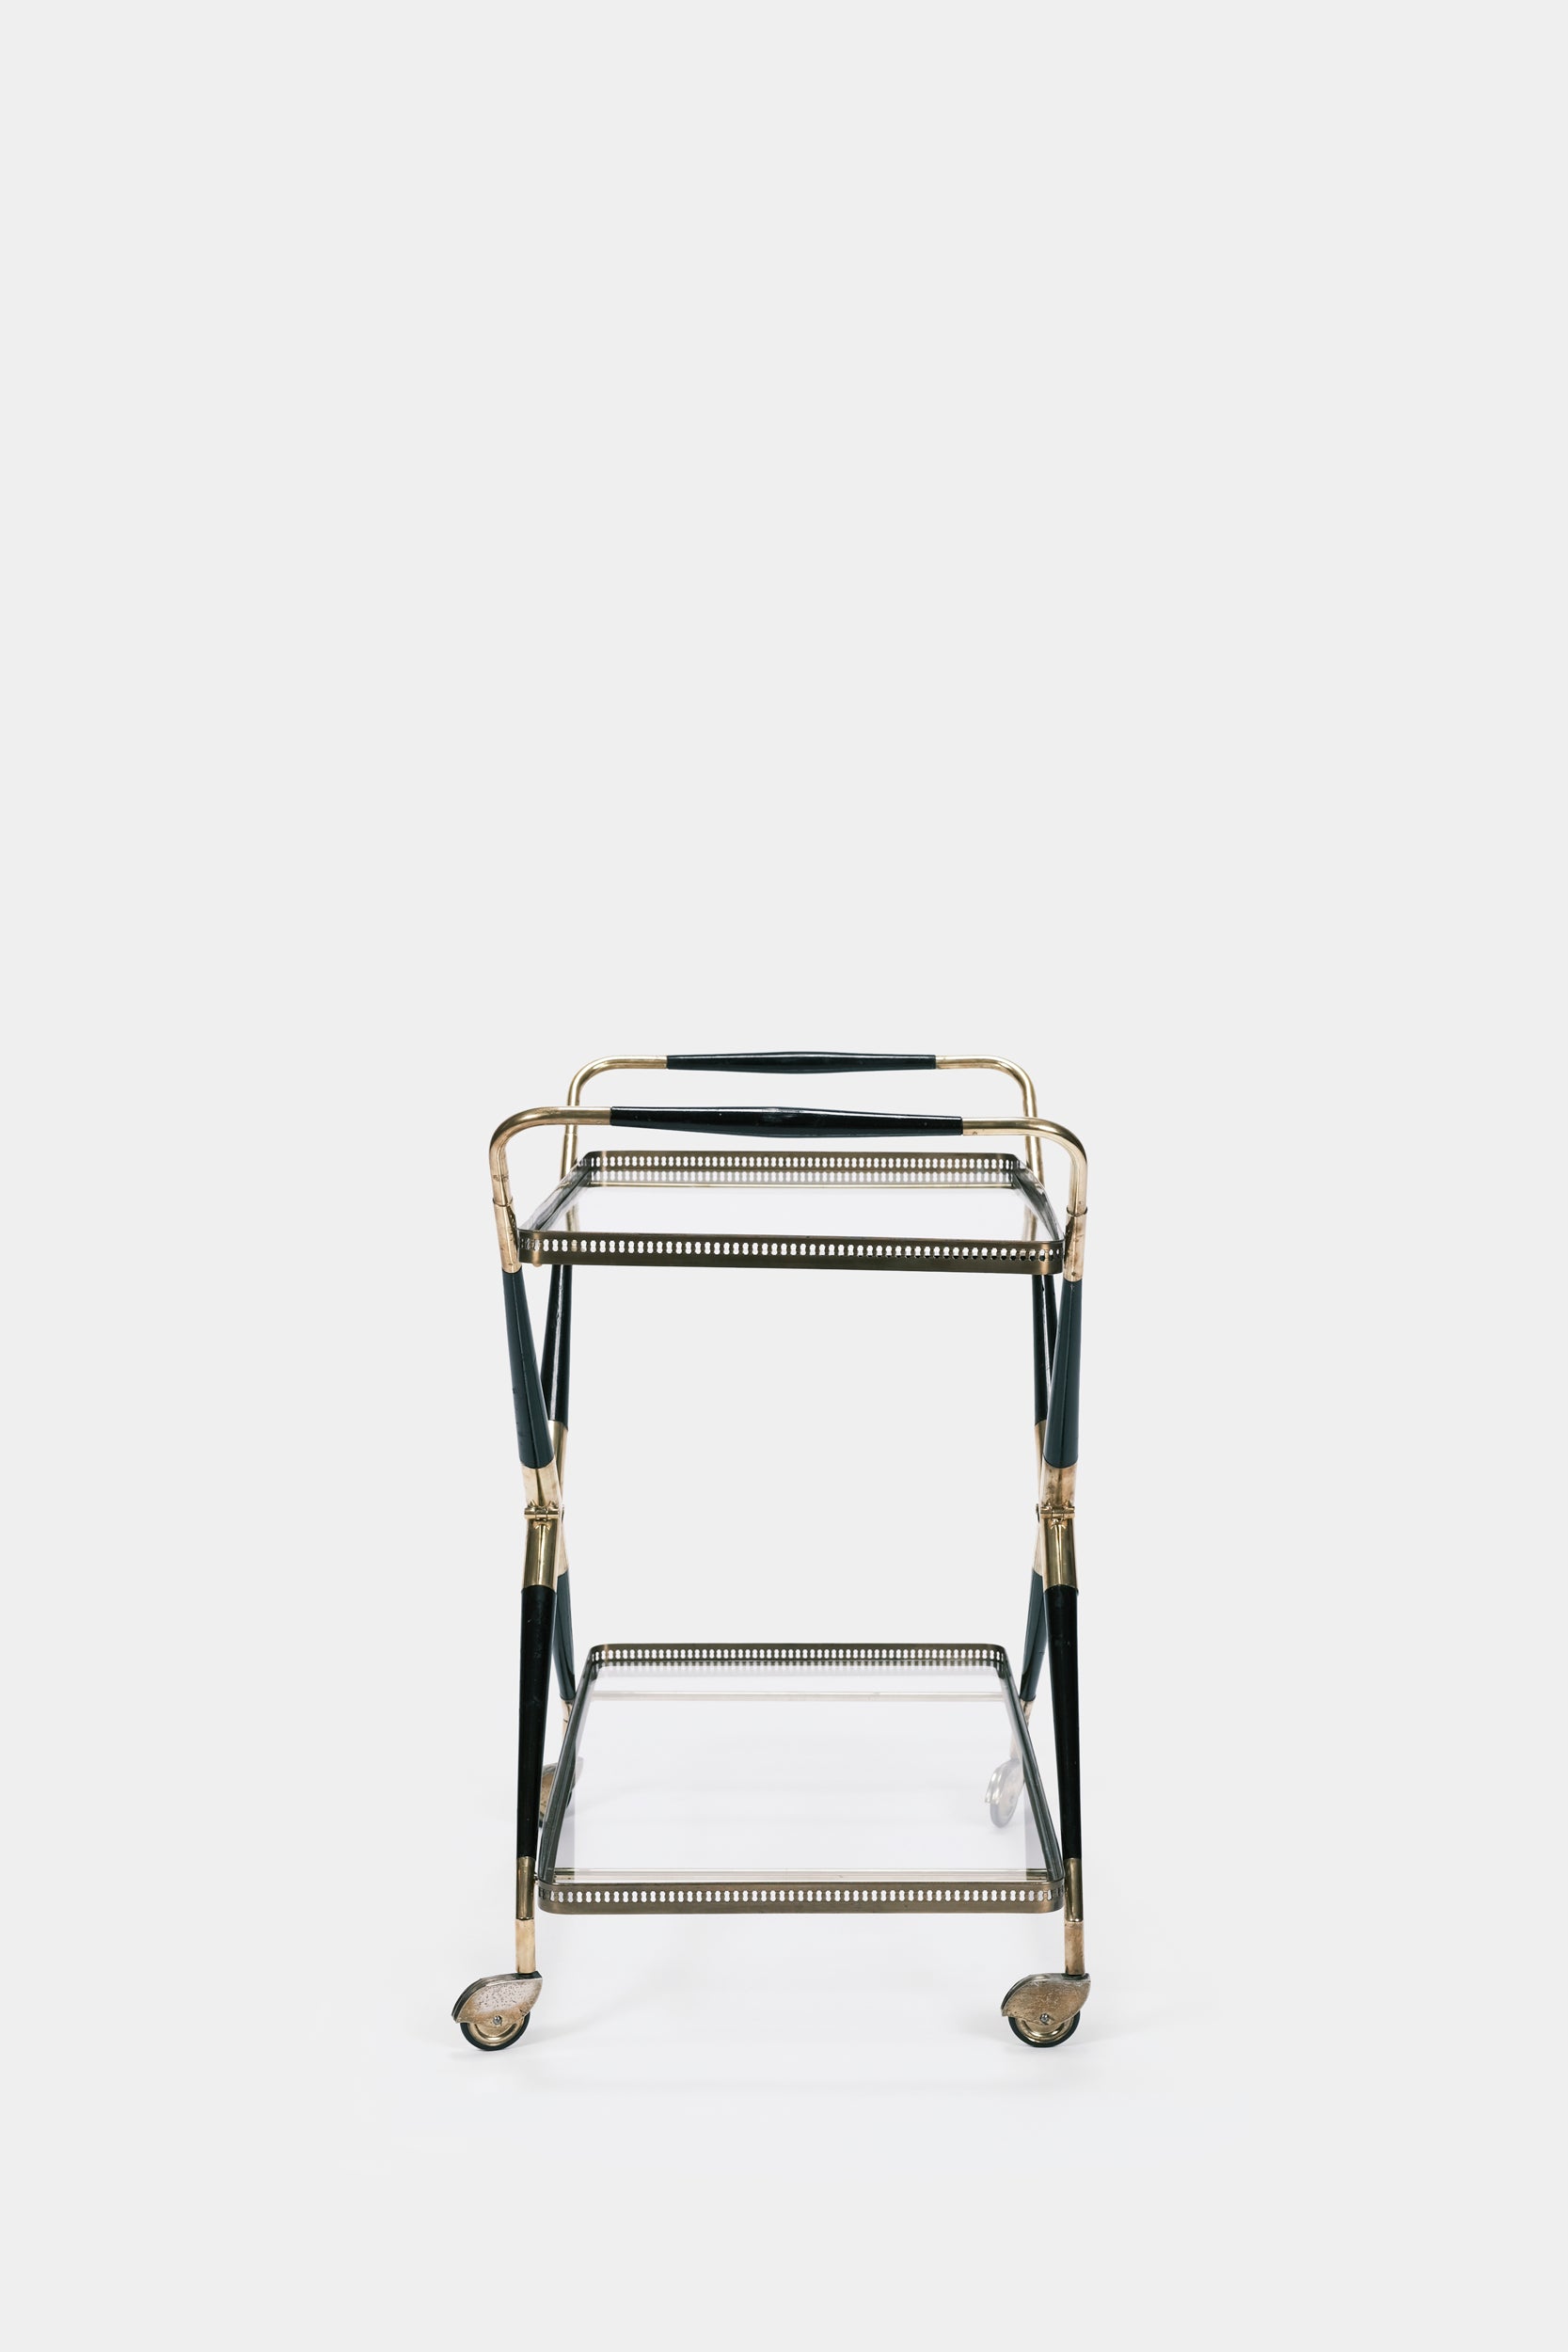 Cesare Lacca Foldable Serving Trolley